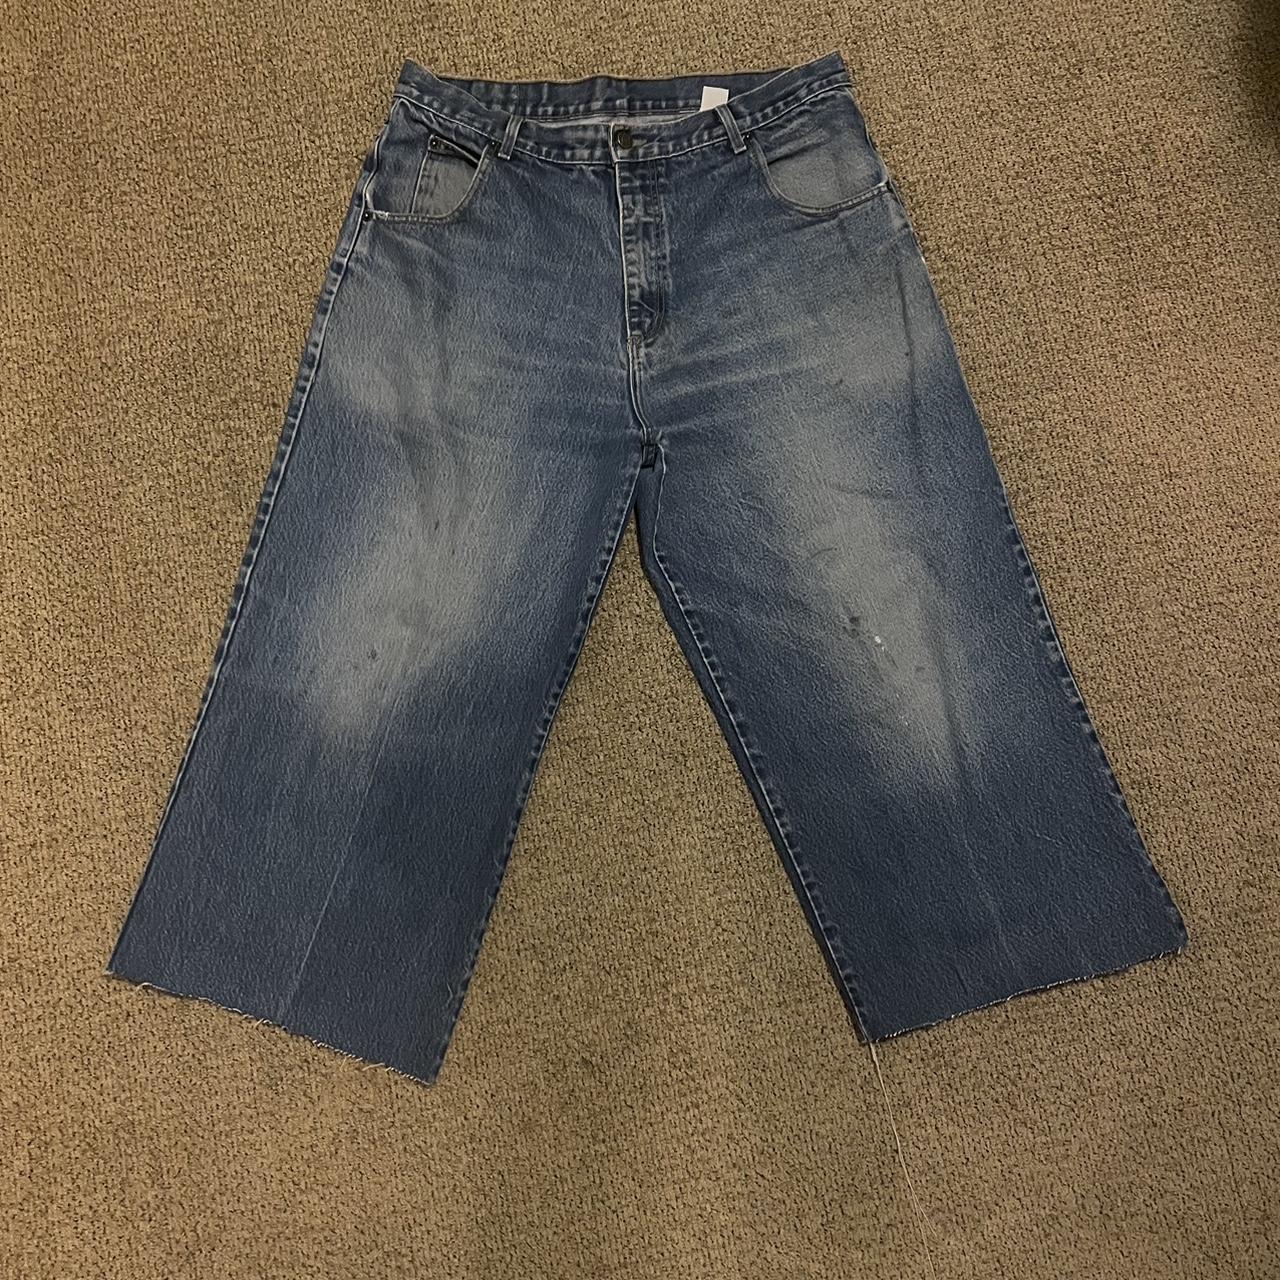 Crazy nice baggy solo jeans cut to 30” ish minor... - Depop